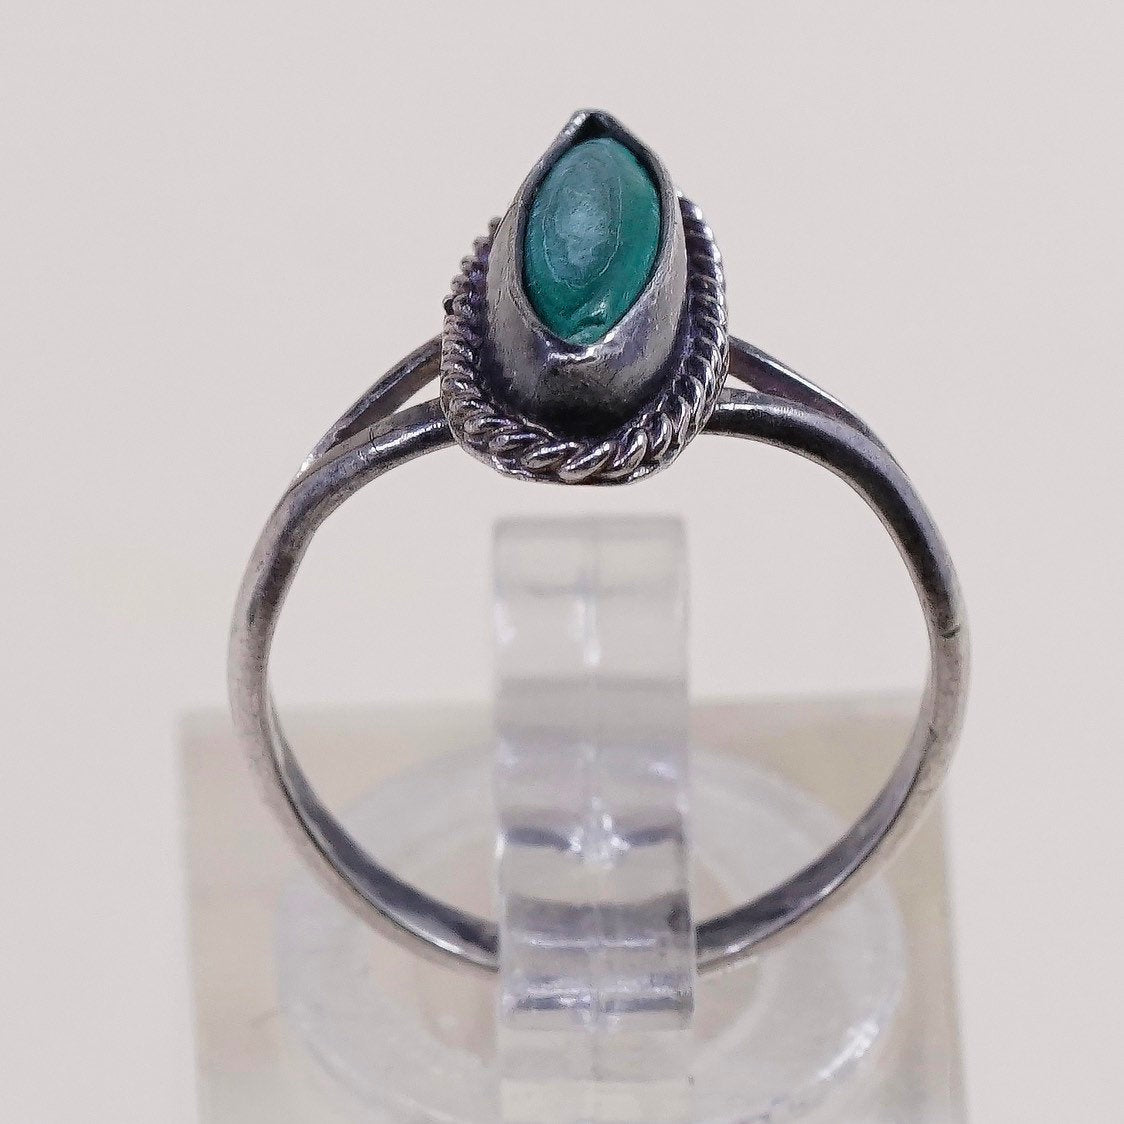 sz 5.25, vtg sterling silver ring, Native American handmade 925 ring w/ turquoise